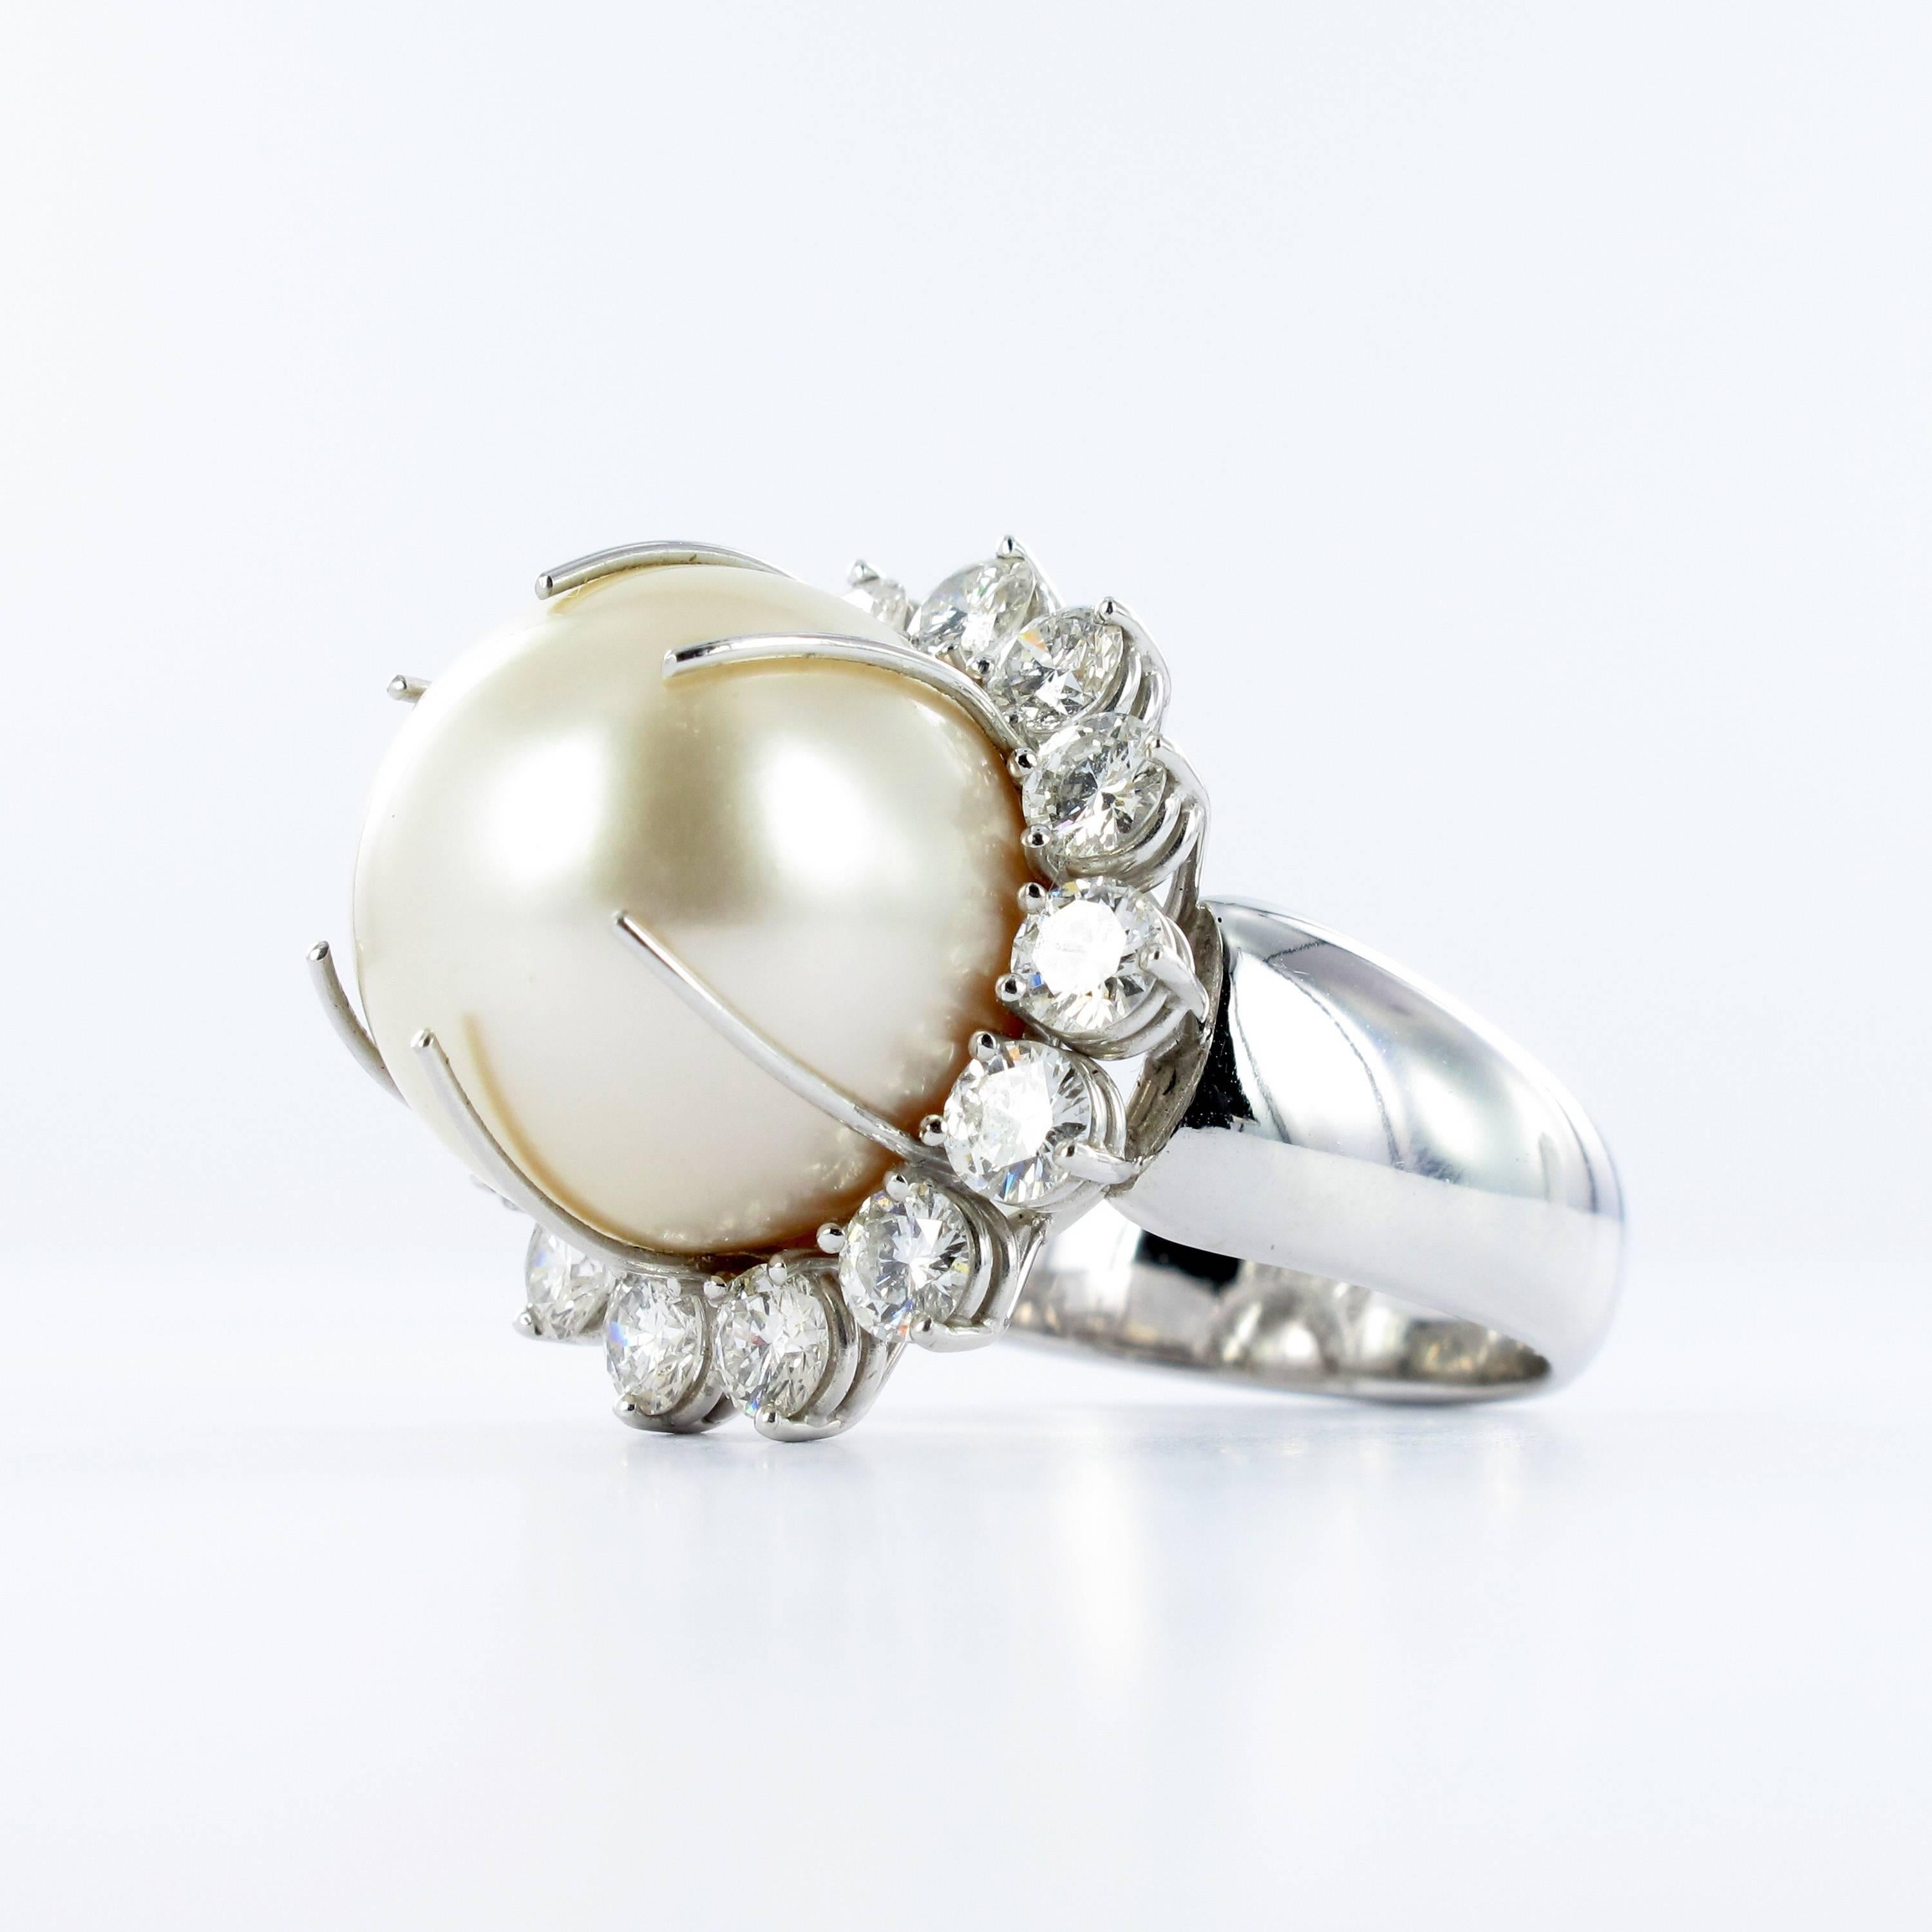 Classic Cocktail Ring in white gold 750. Set with one round South Sea Cultured Pearl of 15.7 mm in diameter. The Pearl is kept in position by six elongated prongs. The pearl is rotatable and has no drill hole. Classic Entourage of 14 fine quality